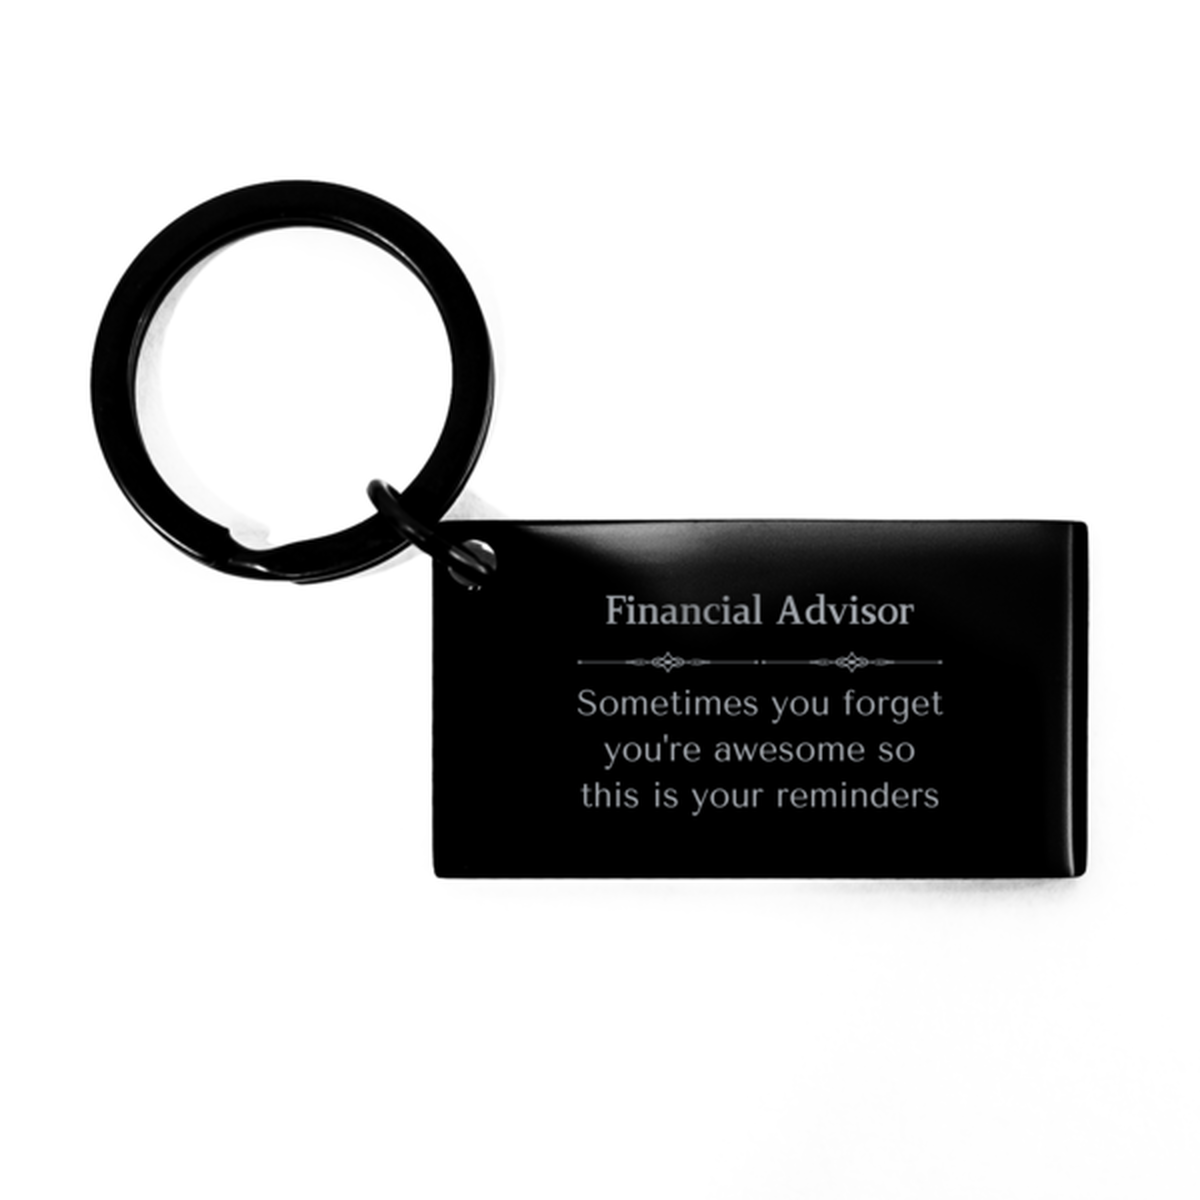 Sentimental Financial Advisor Keychain, Law Enforcement Officer Sometimes you forget you're awesome so this is your reminders, Graduation Christmas Birthday Gifts for Financial Advisor, Men, Women, Coworkers